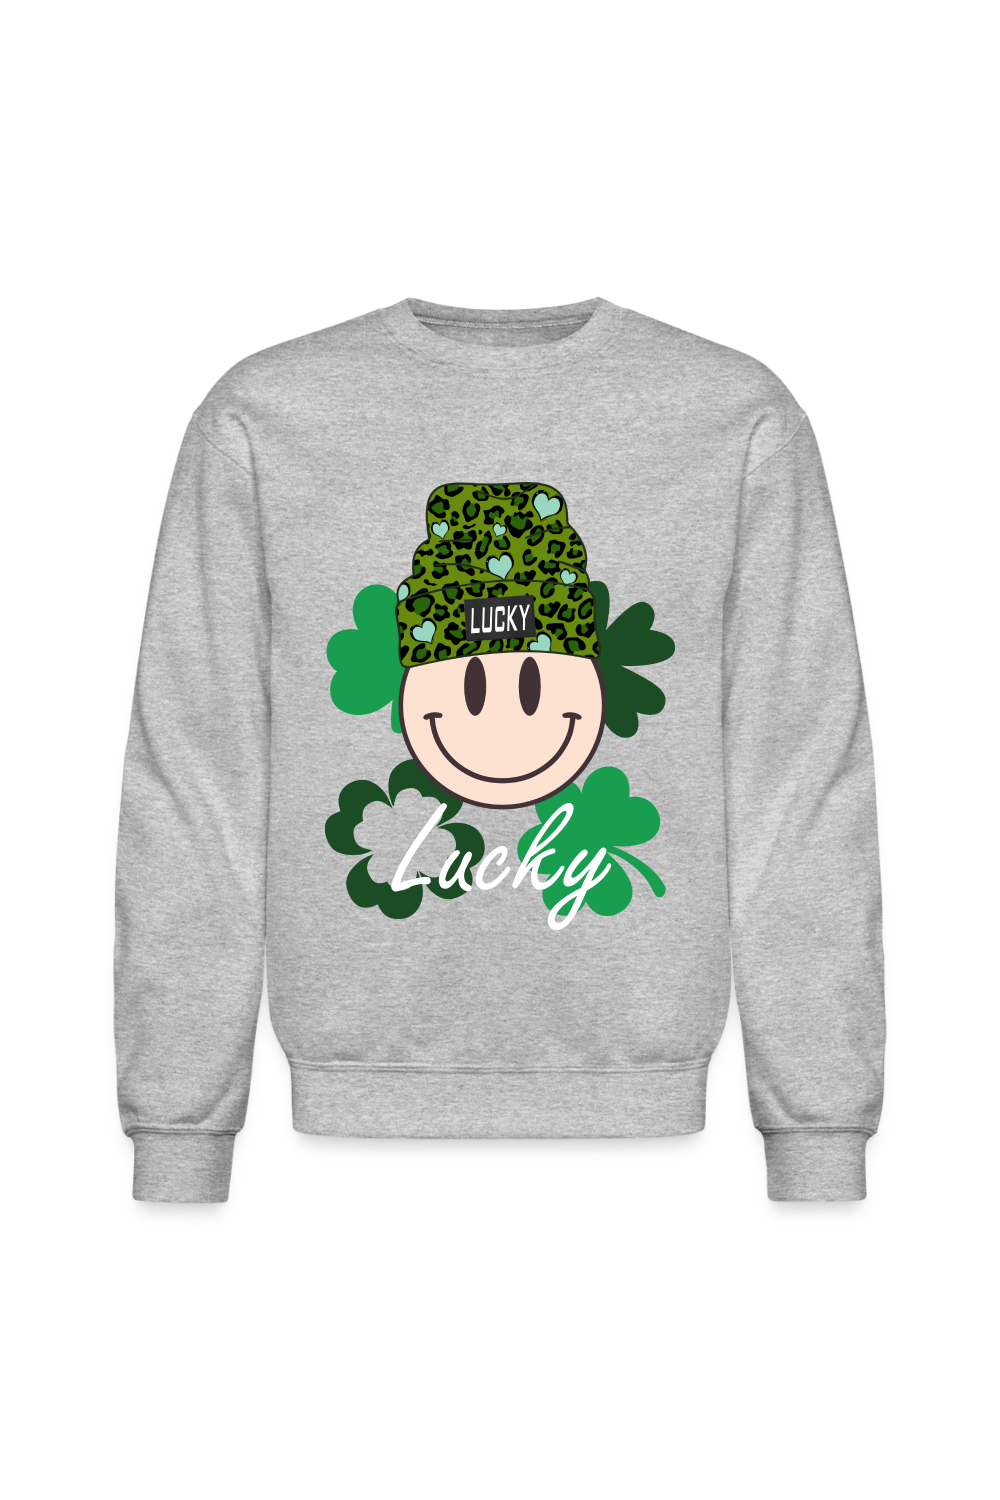 Women Lucky Smiley Face with Beanie Hat St. Patrick's Day Crewneck Long Sleeve Sweatshirt - heather gray - NicholesGifts.online